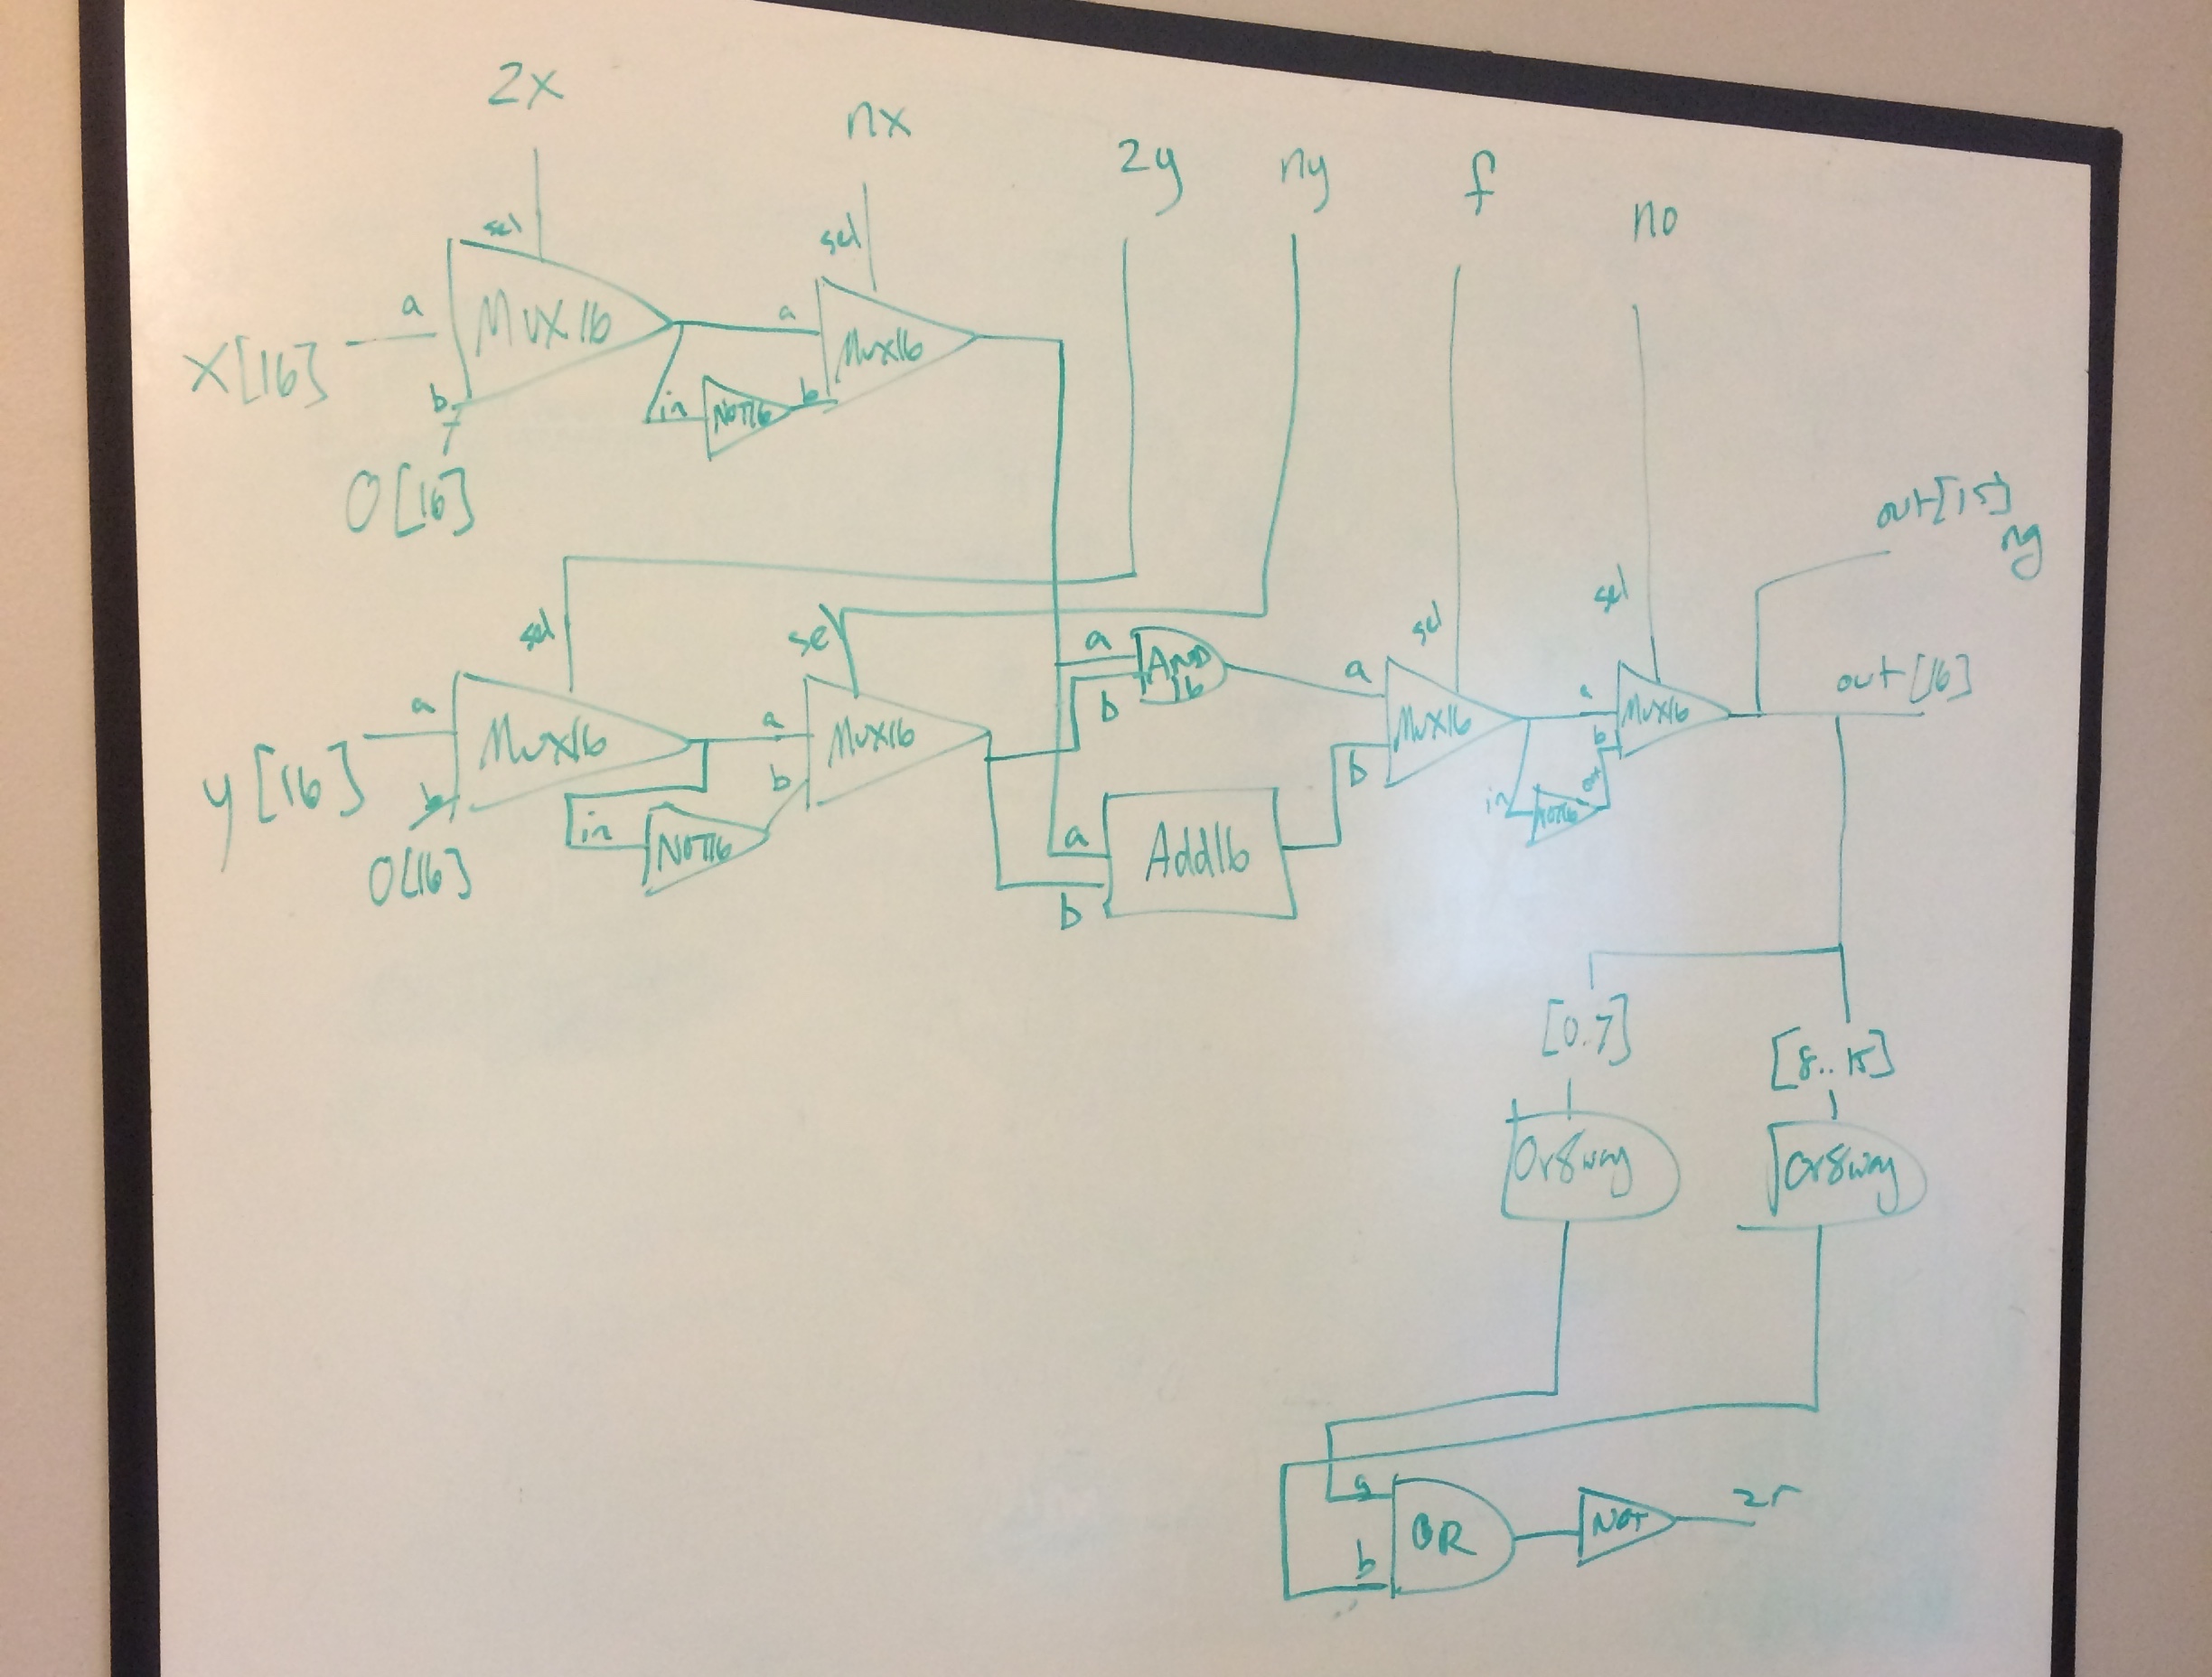 Whiteboard with an ALU drawn on it in green marker. The ALU is made up of different logic gate symbols.